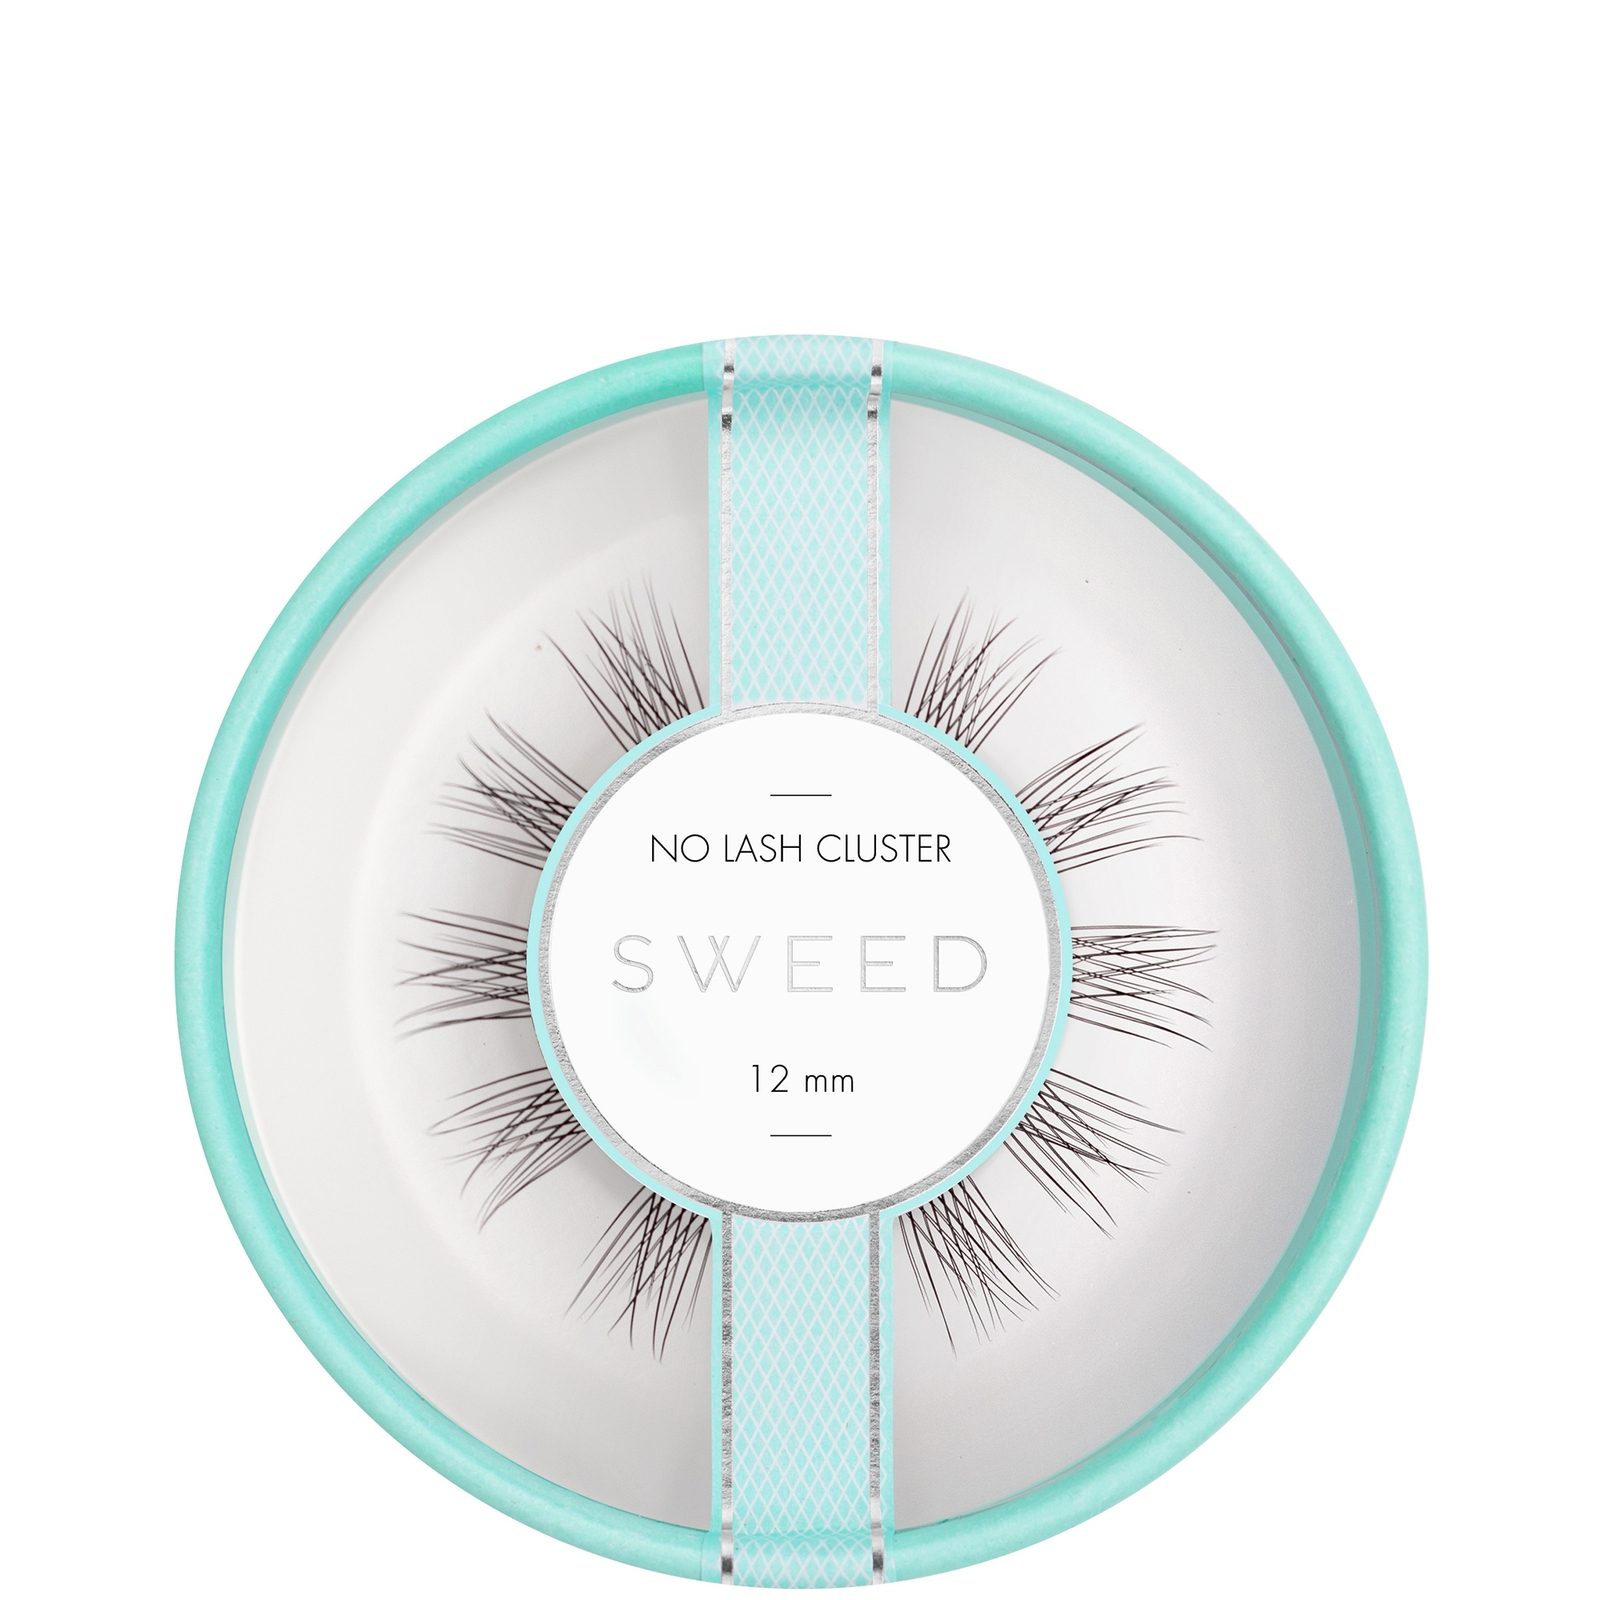 Sweed No Lash Cluster Lashes - 12mm